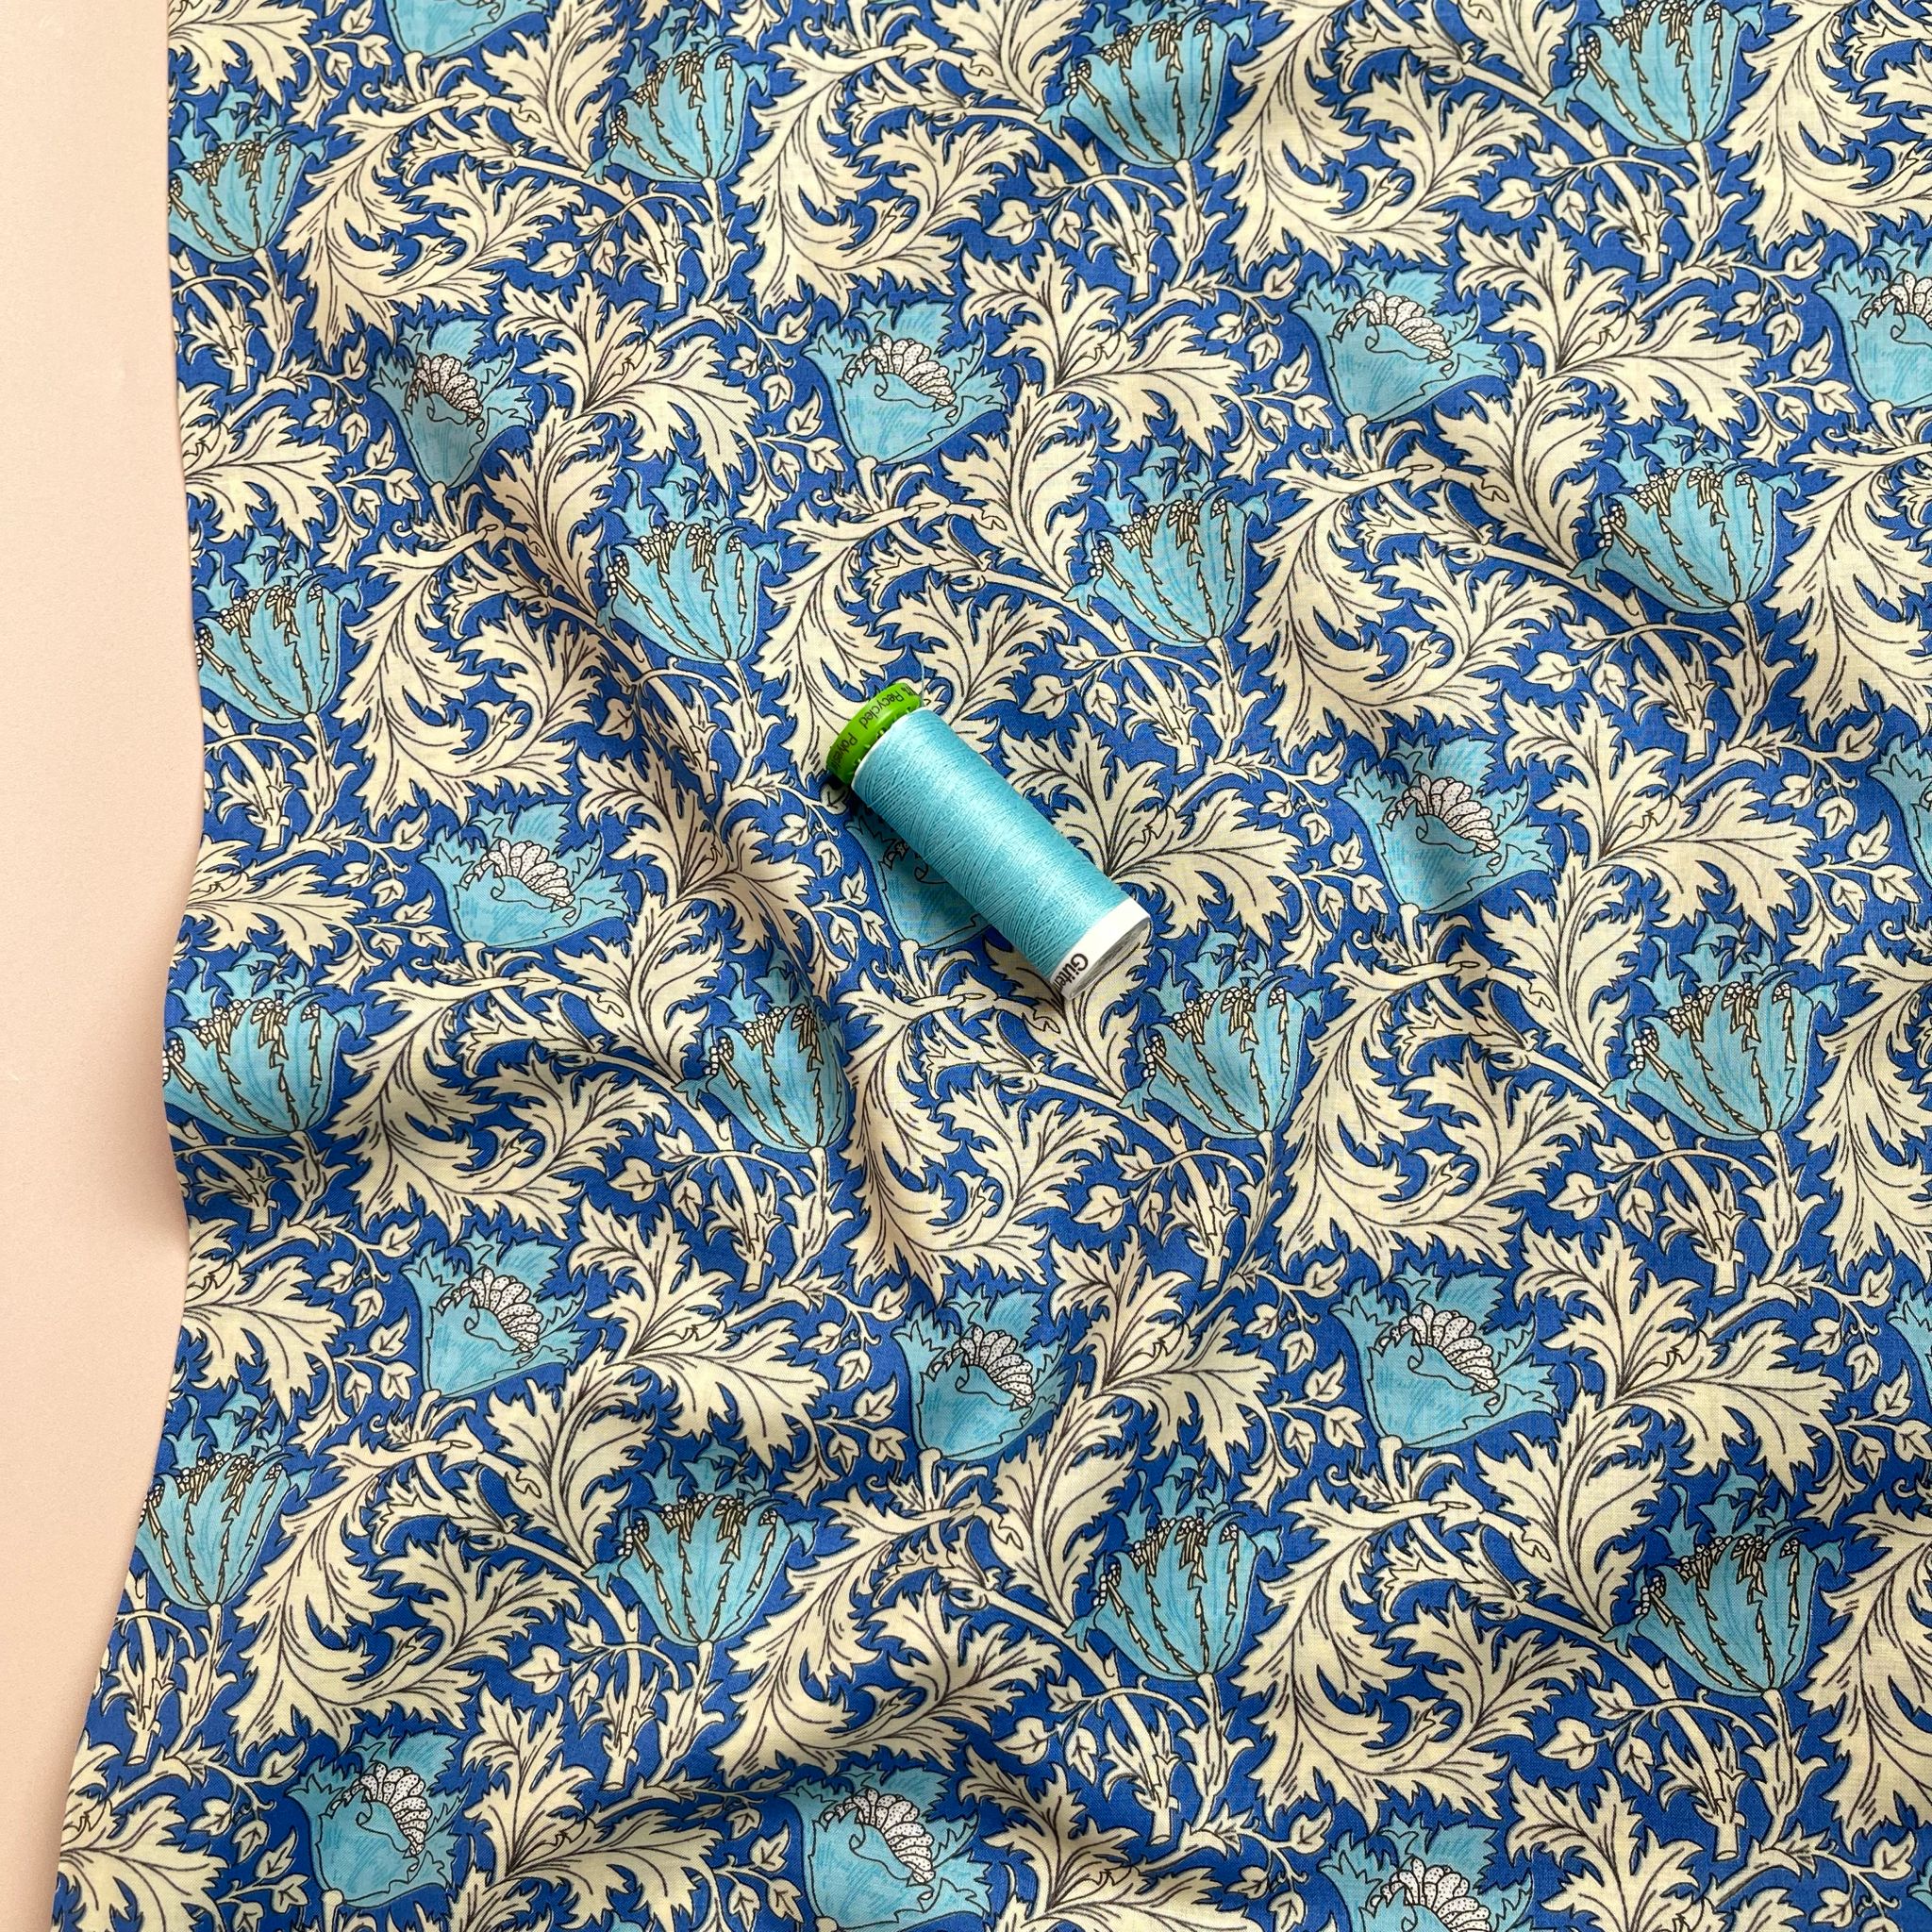 Morris Leaves on Blue Cotton Lawn Fabric